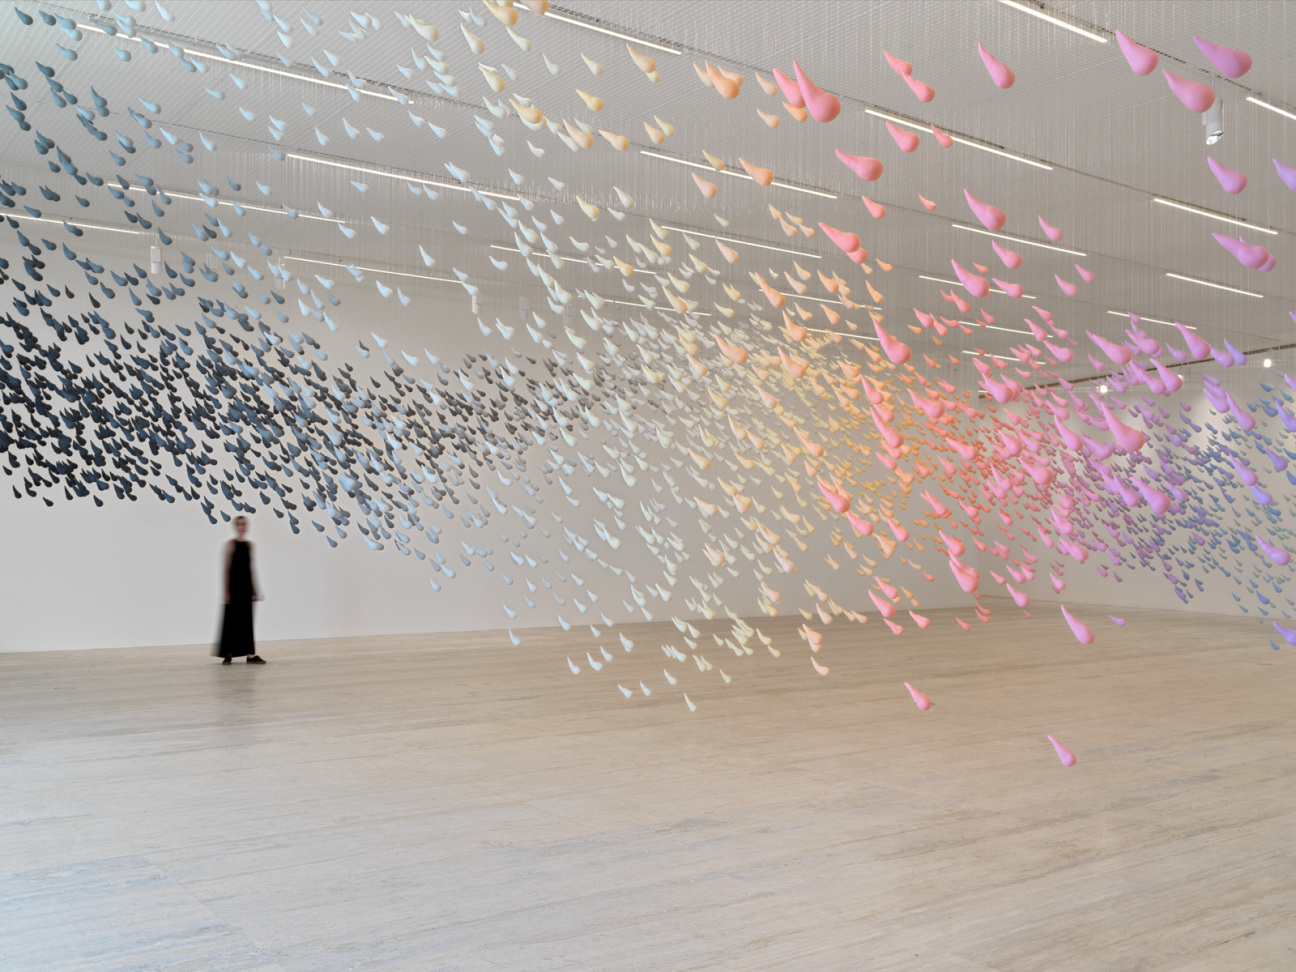 installation view of raindrops at museum